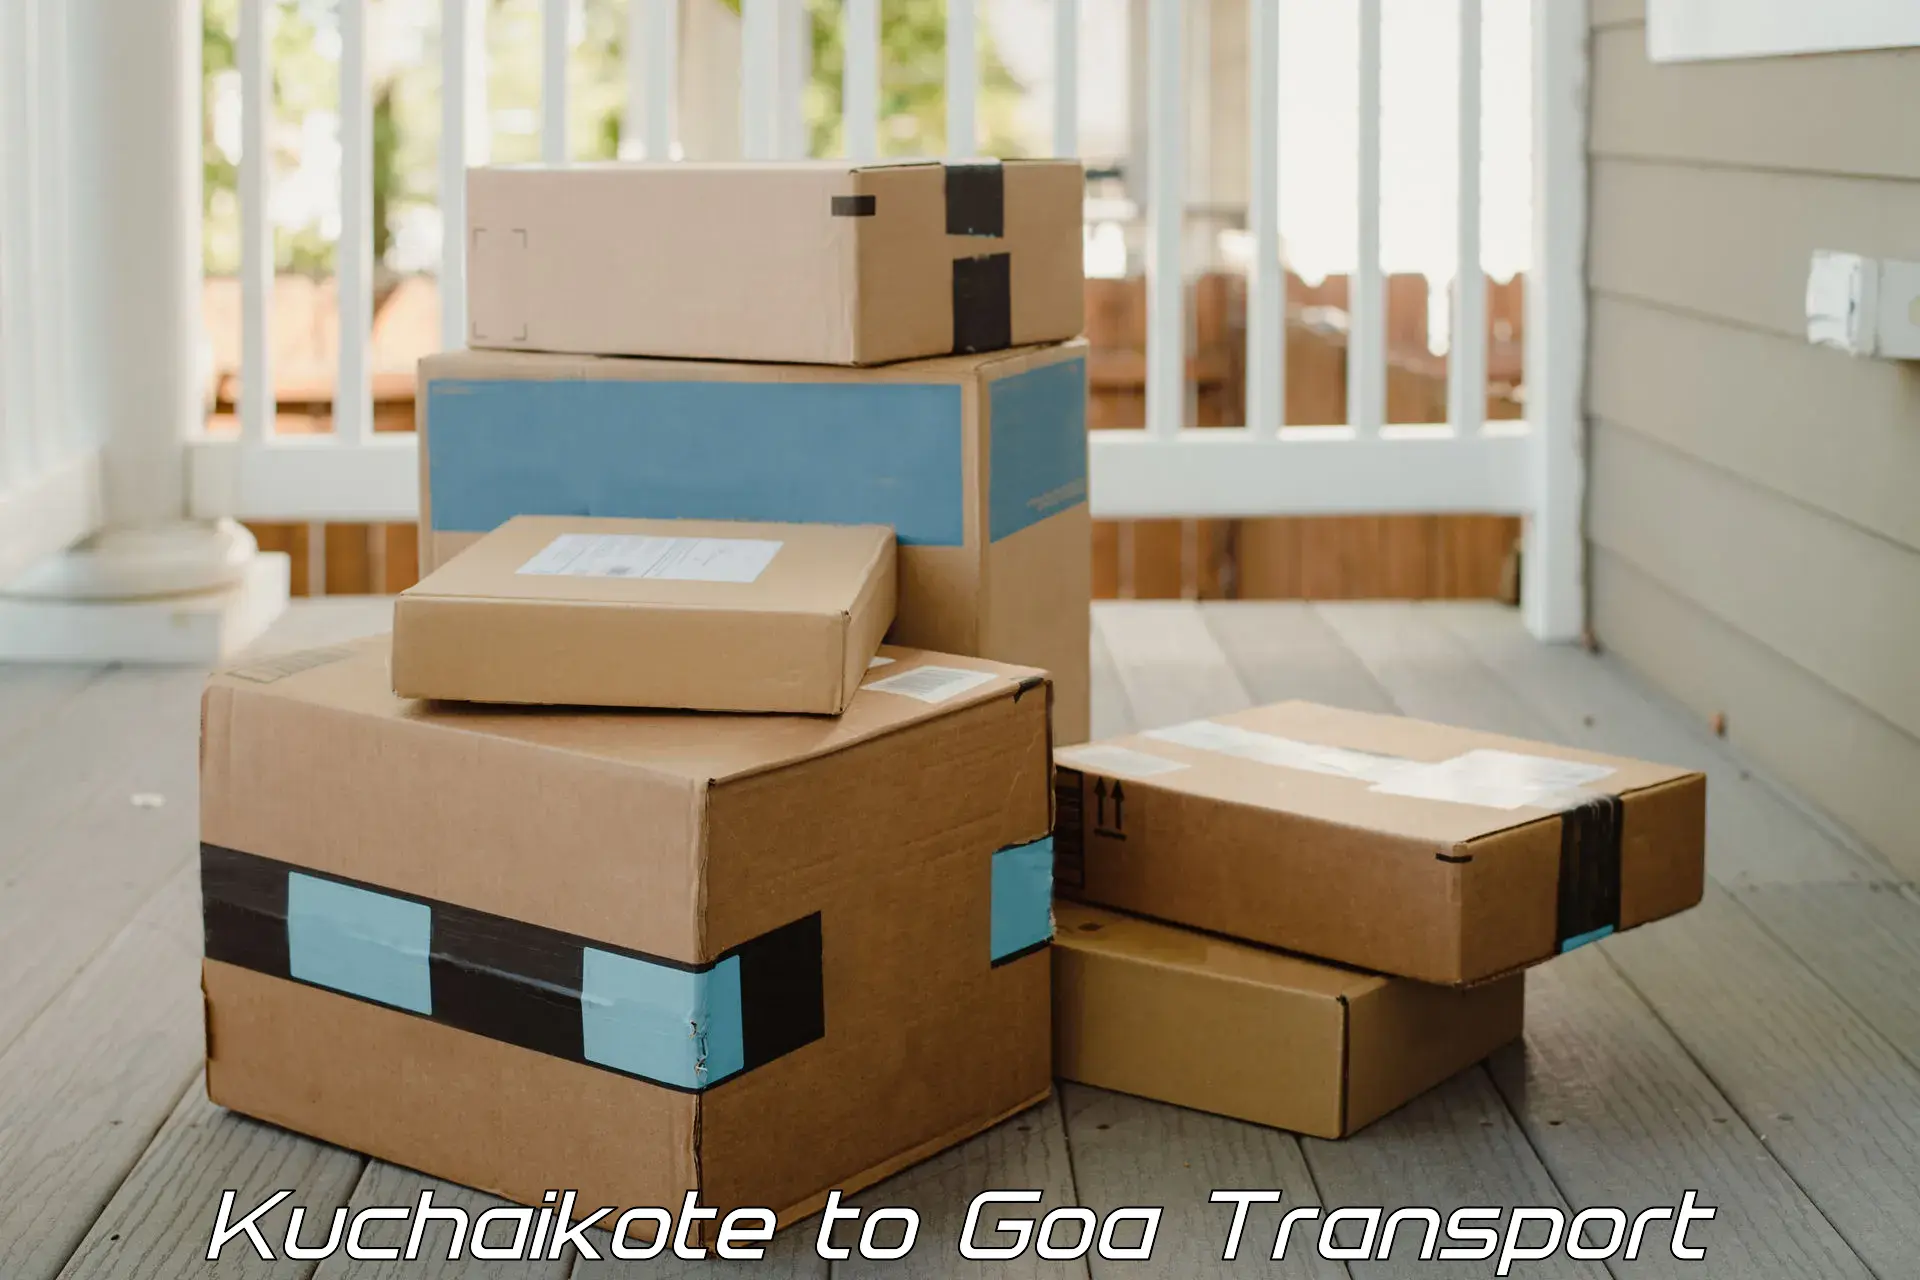 Commercial transport service Kuchaikote to Goa